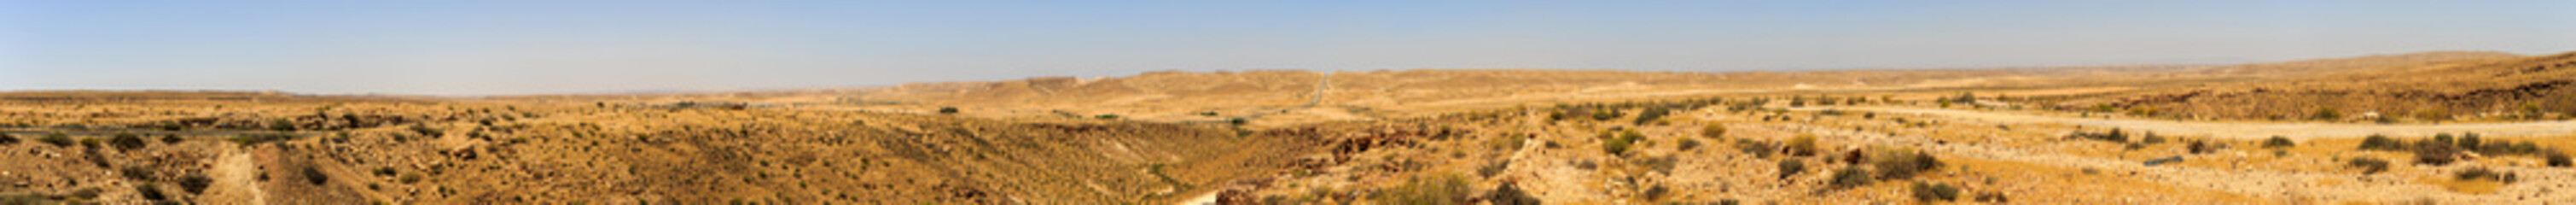 Wide panorama of mountains in Negev desert with road